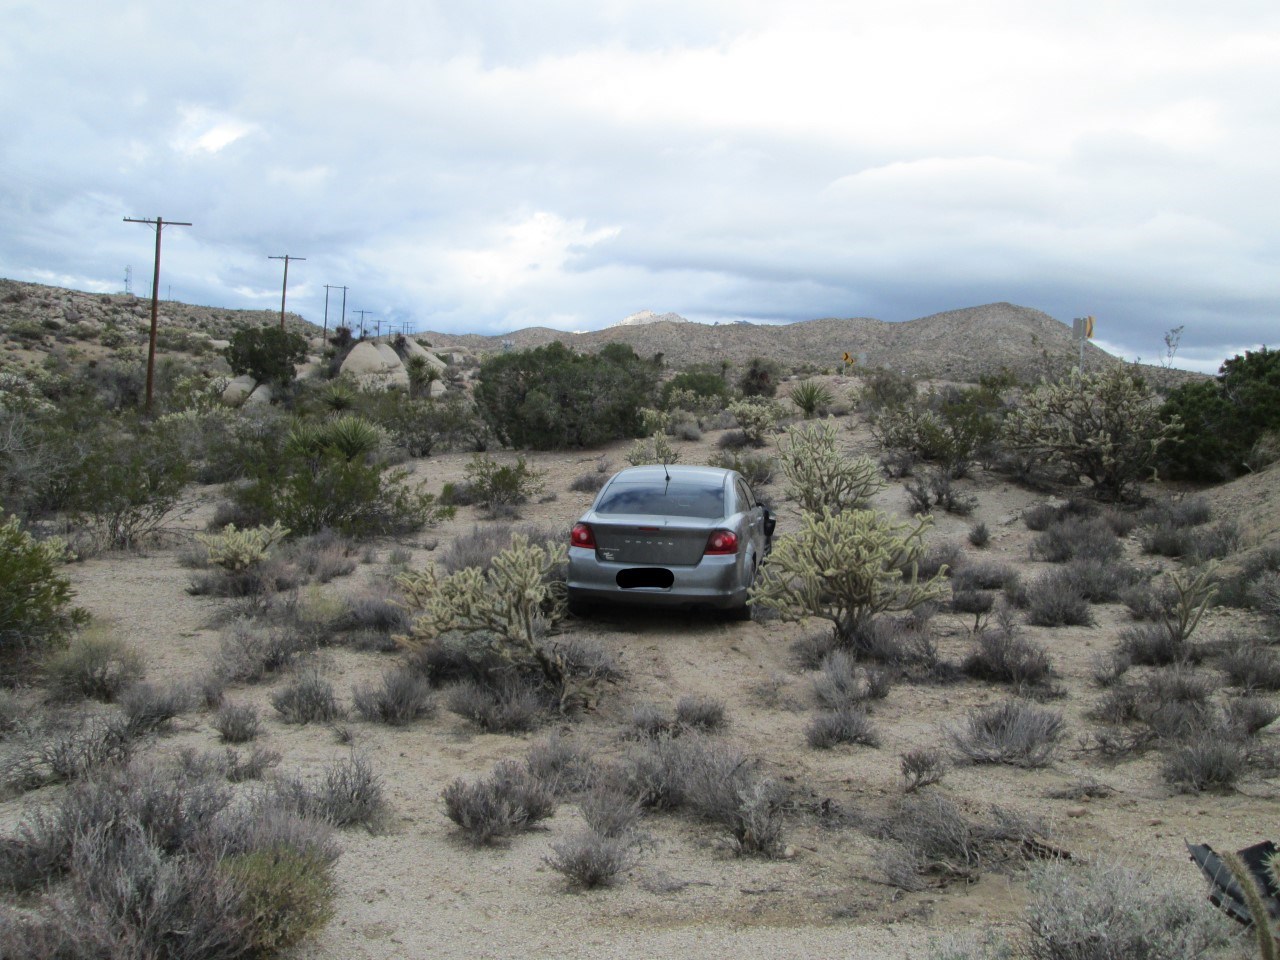 A low clearance vehicle that got stuck amongst creosote and cactus that tried to create a new desert road.